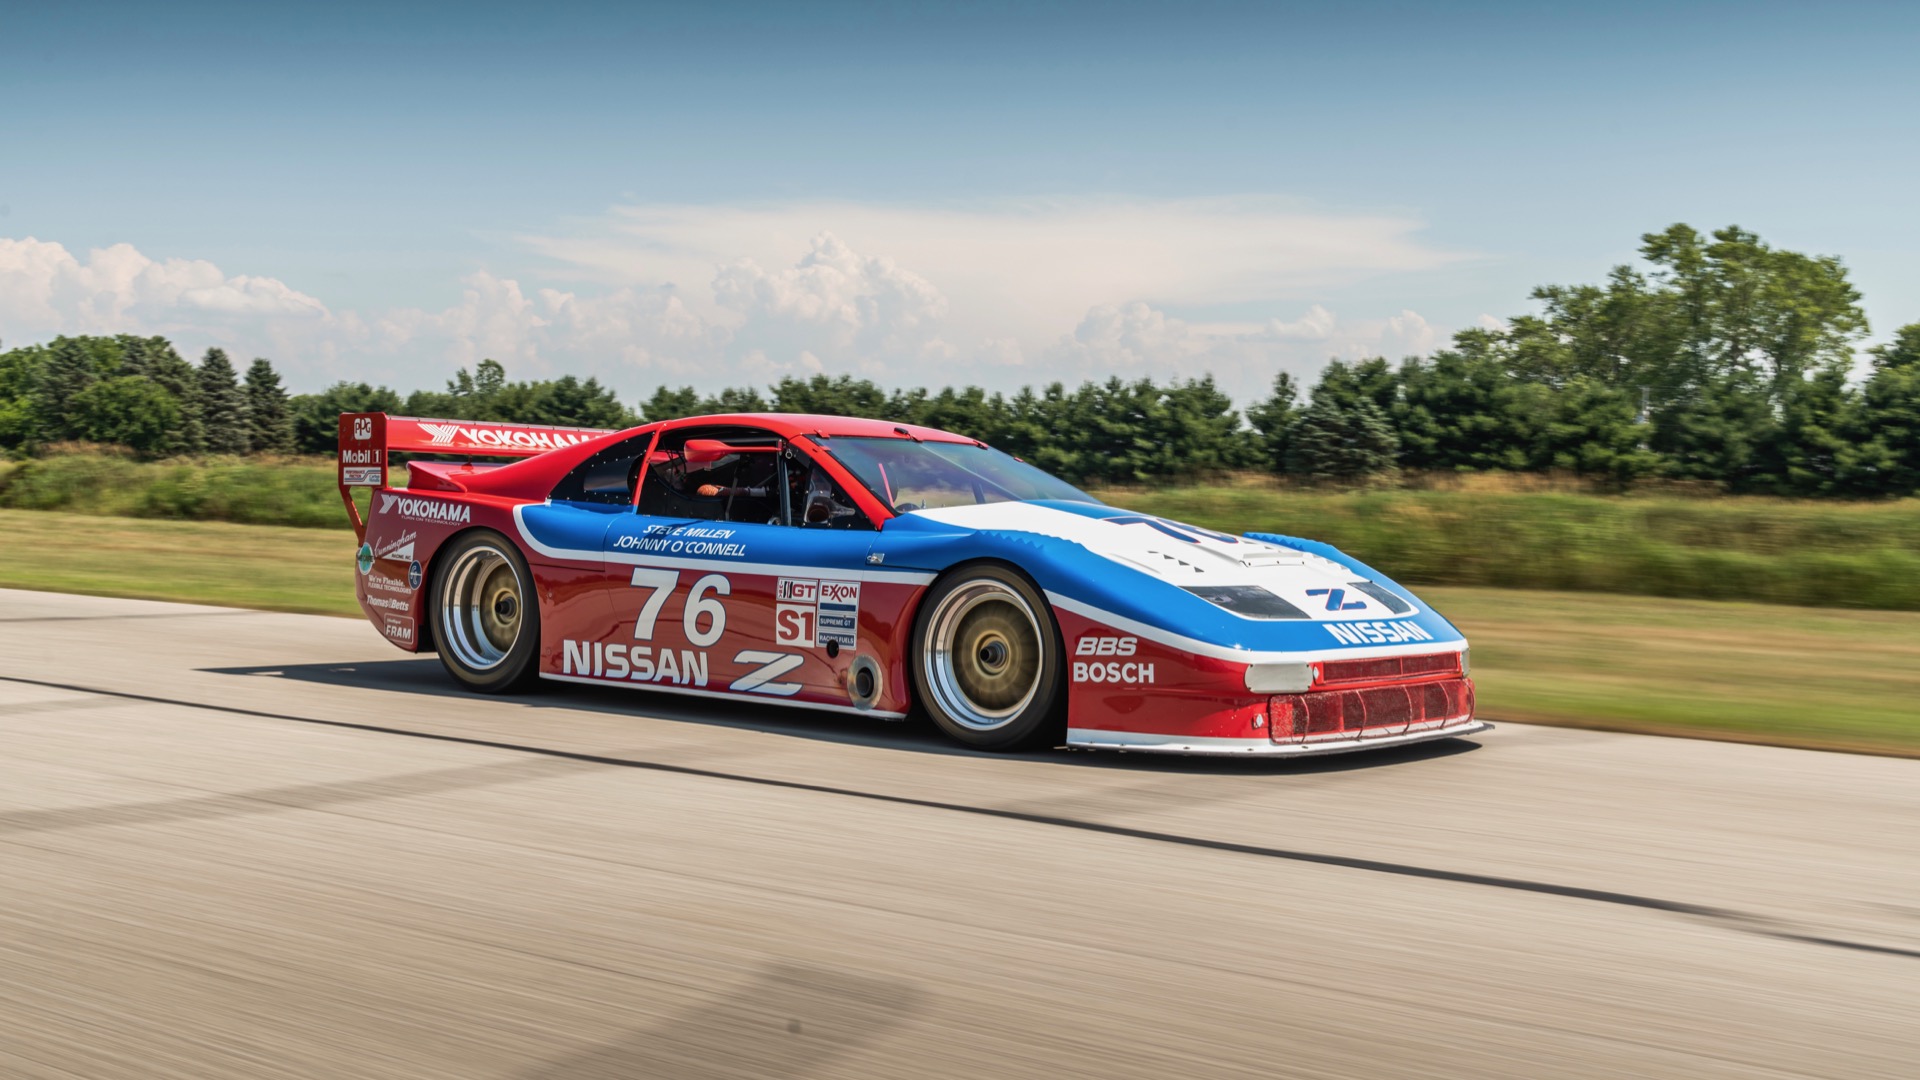 1989 Nissan 300ZX race car is a throwback to the automaker's glory 